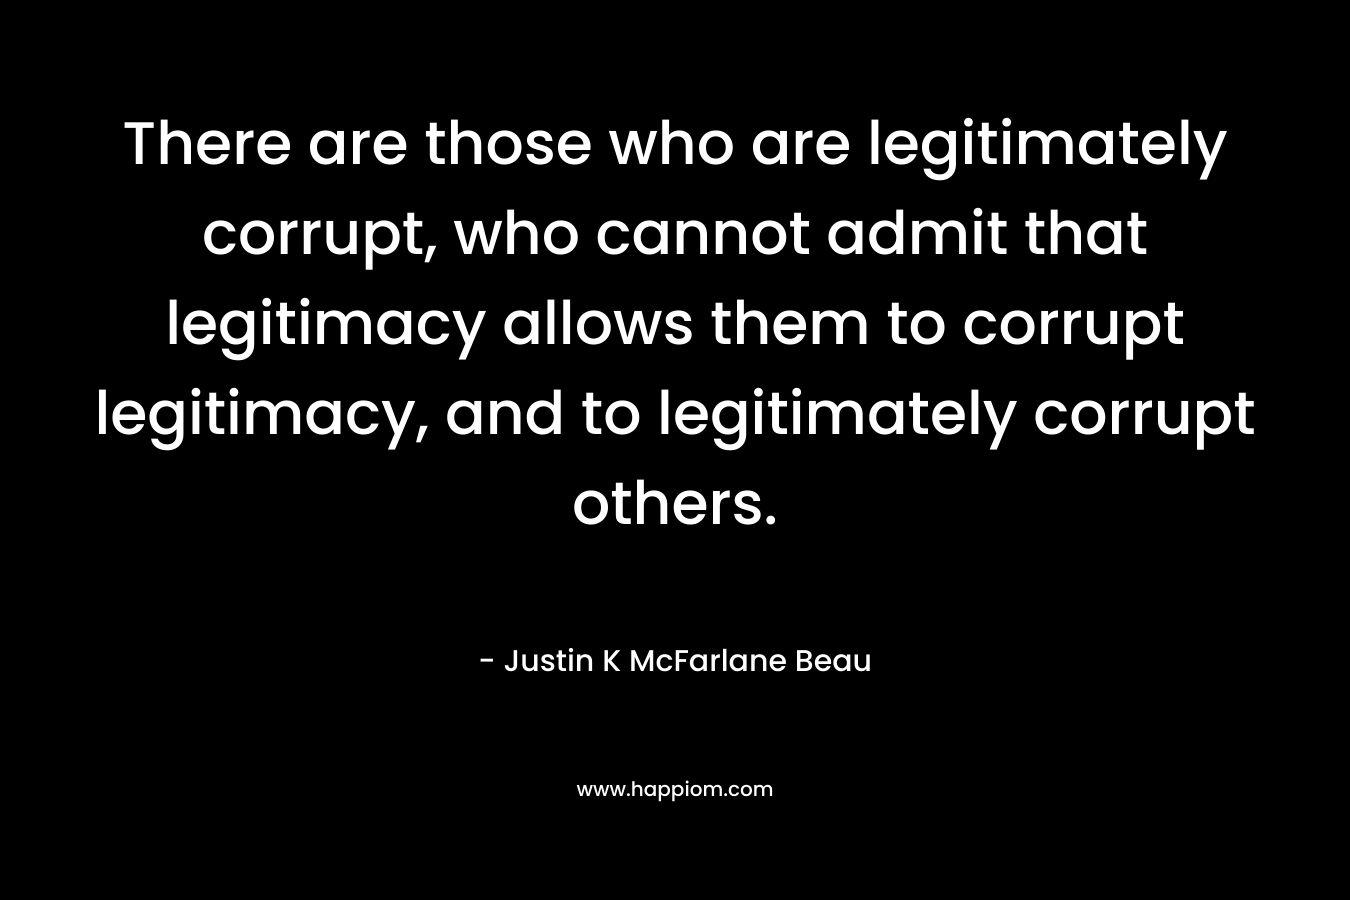 There are those who are legitimately corrupt, who cannot admit that legitimacy allows them to corrupt legitimacy, and to legitimately corrupt others.